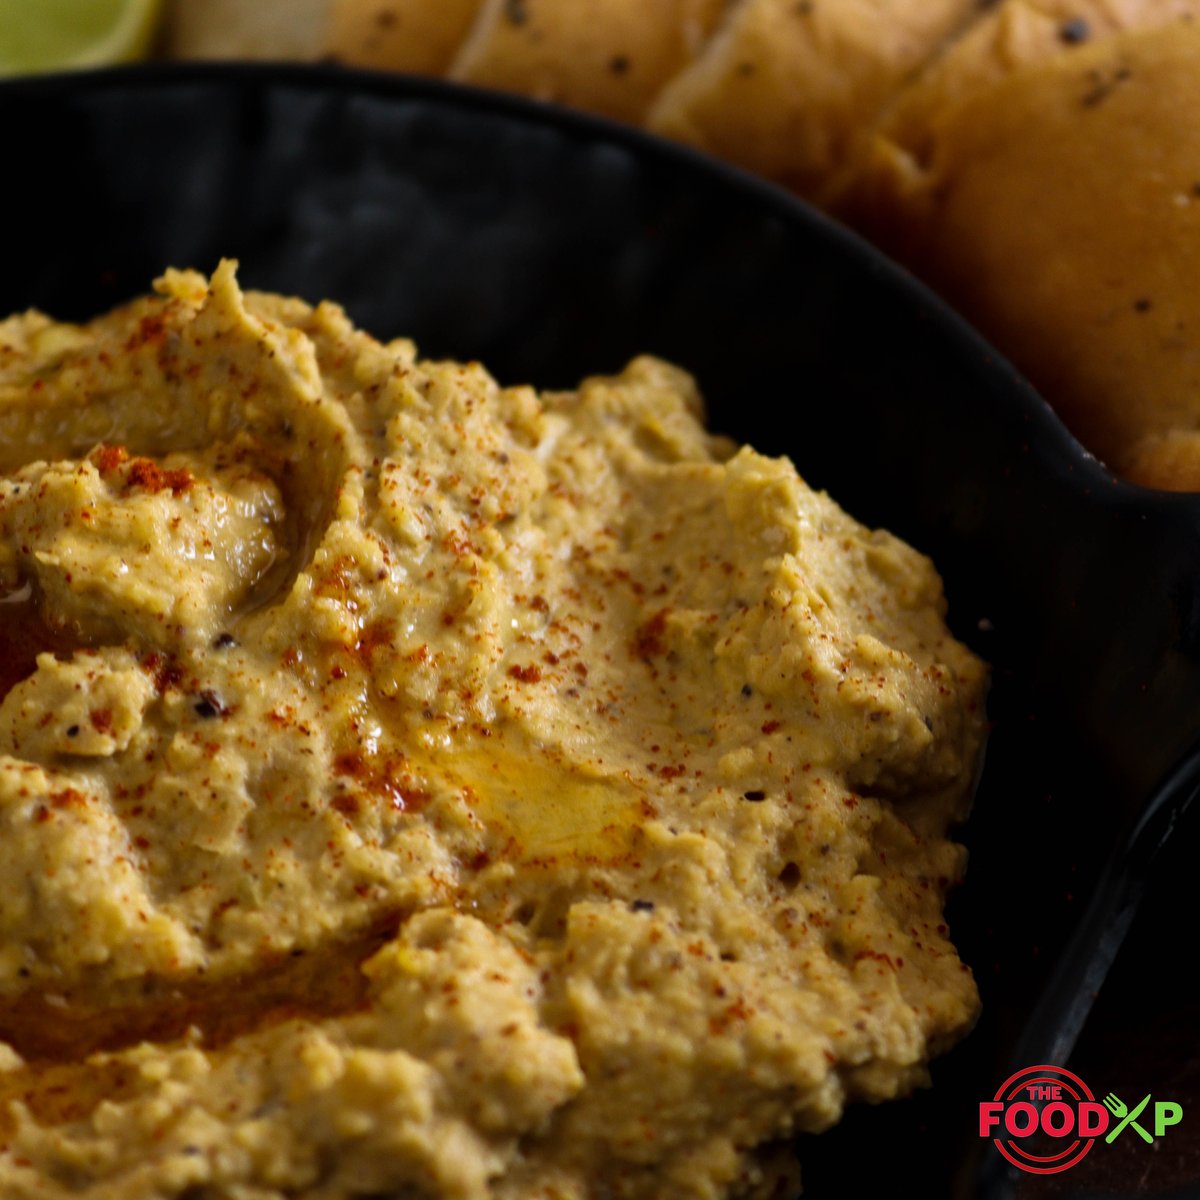 Try this delicious smooth dip for your happy hour and beyond! Just click on the link to watch the video of this recipe of Gordon Ramsay’s roasted squash hummus. 
https://t.co/qLPKwMKLNn

#Suqash #Hummus #RecipeOfTheDay #Recipe https://t.co/QgyJRoU2Kf